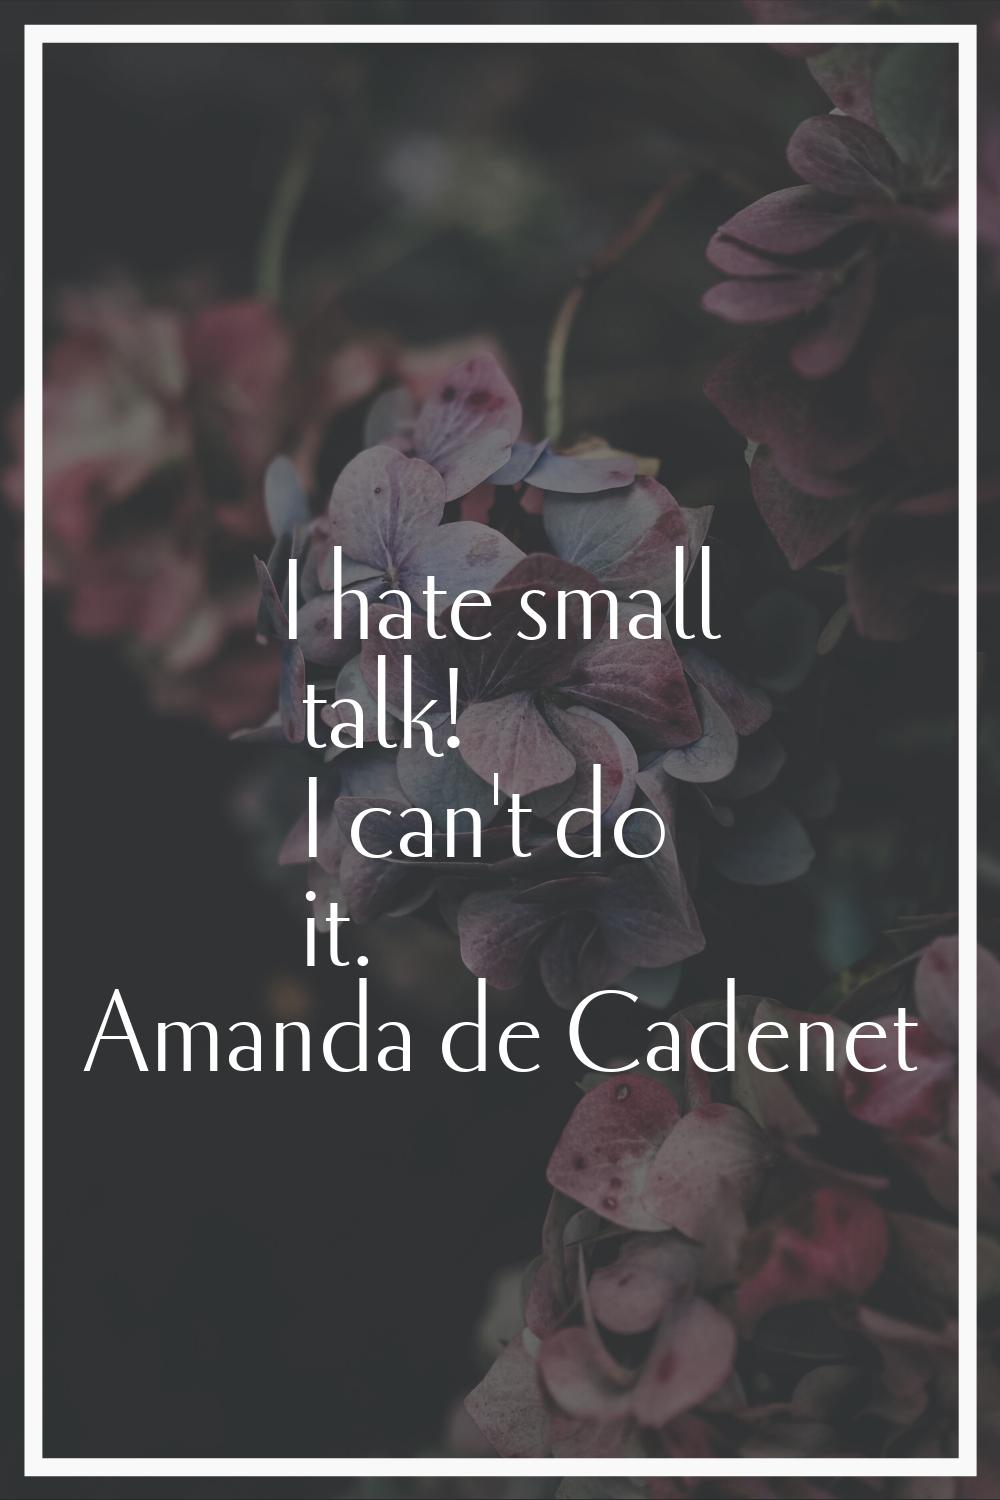 I hate small talk! I can't do it.